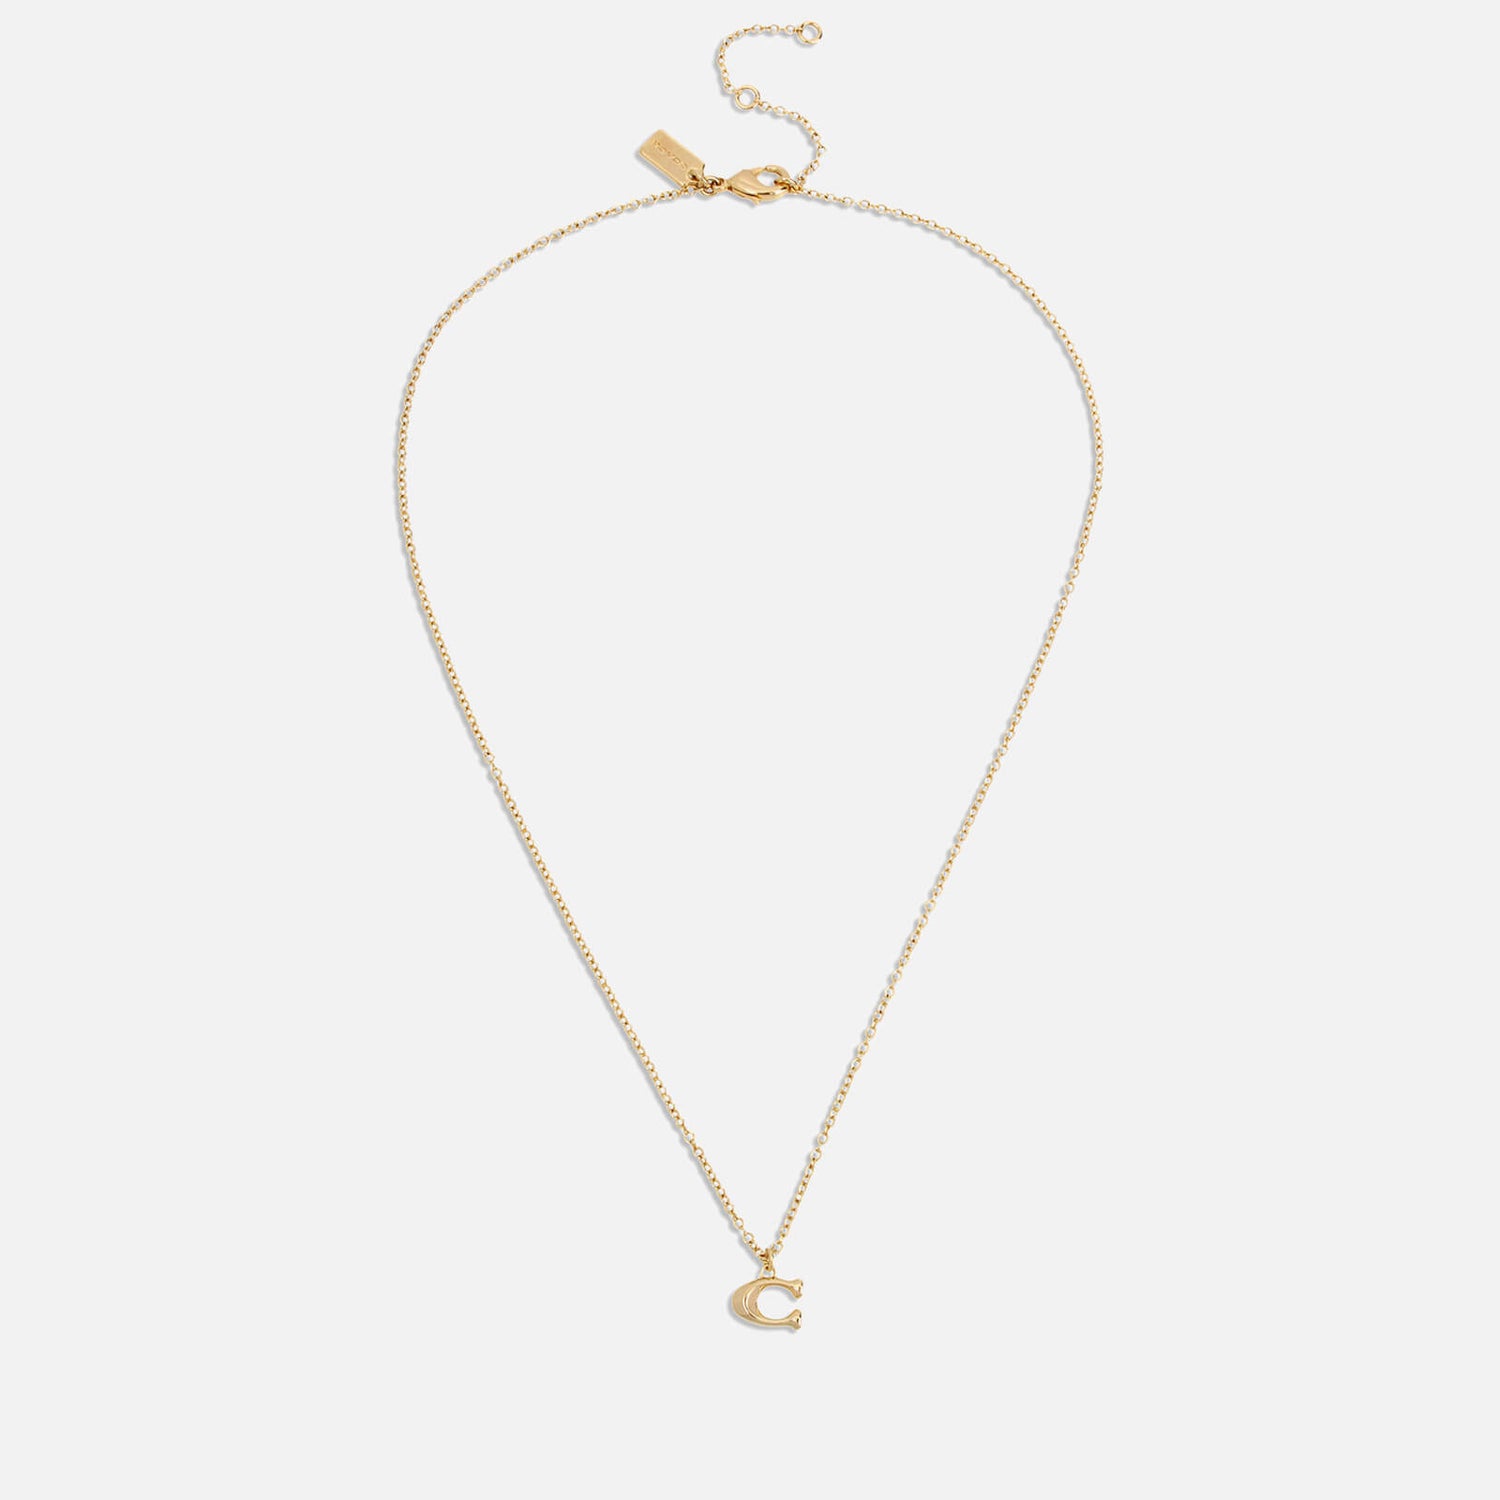 Coach Core Essentials Gold-Plated Necklace